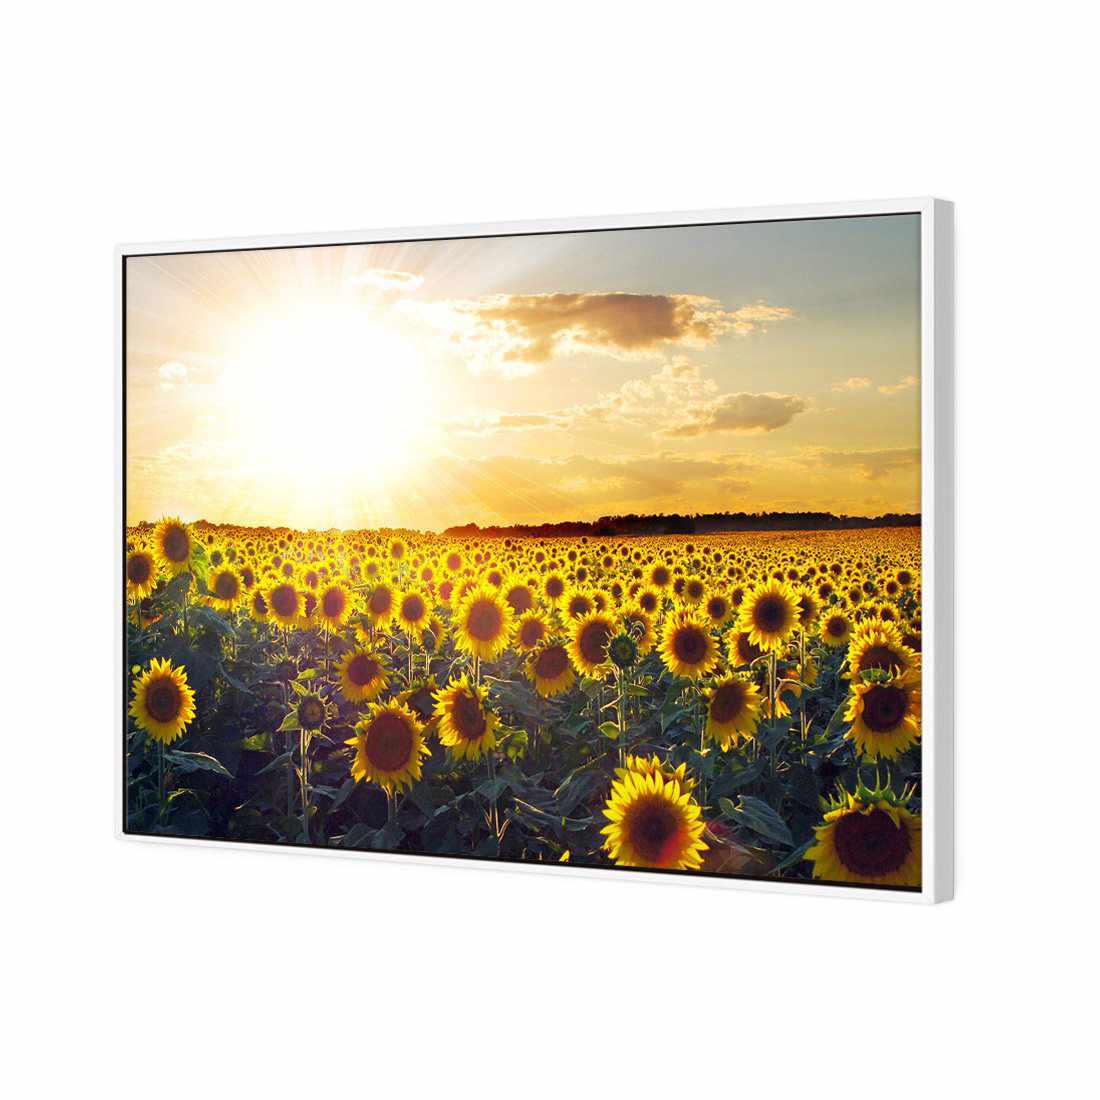 Sunflowers At Sunset Canvas Art-Canvas-Wall Art Designs-45x30cm-Canvas - White Frame-Wall Art Designs